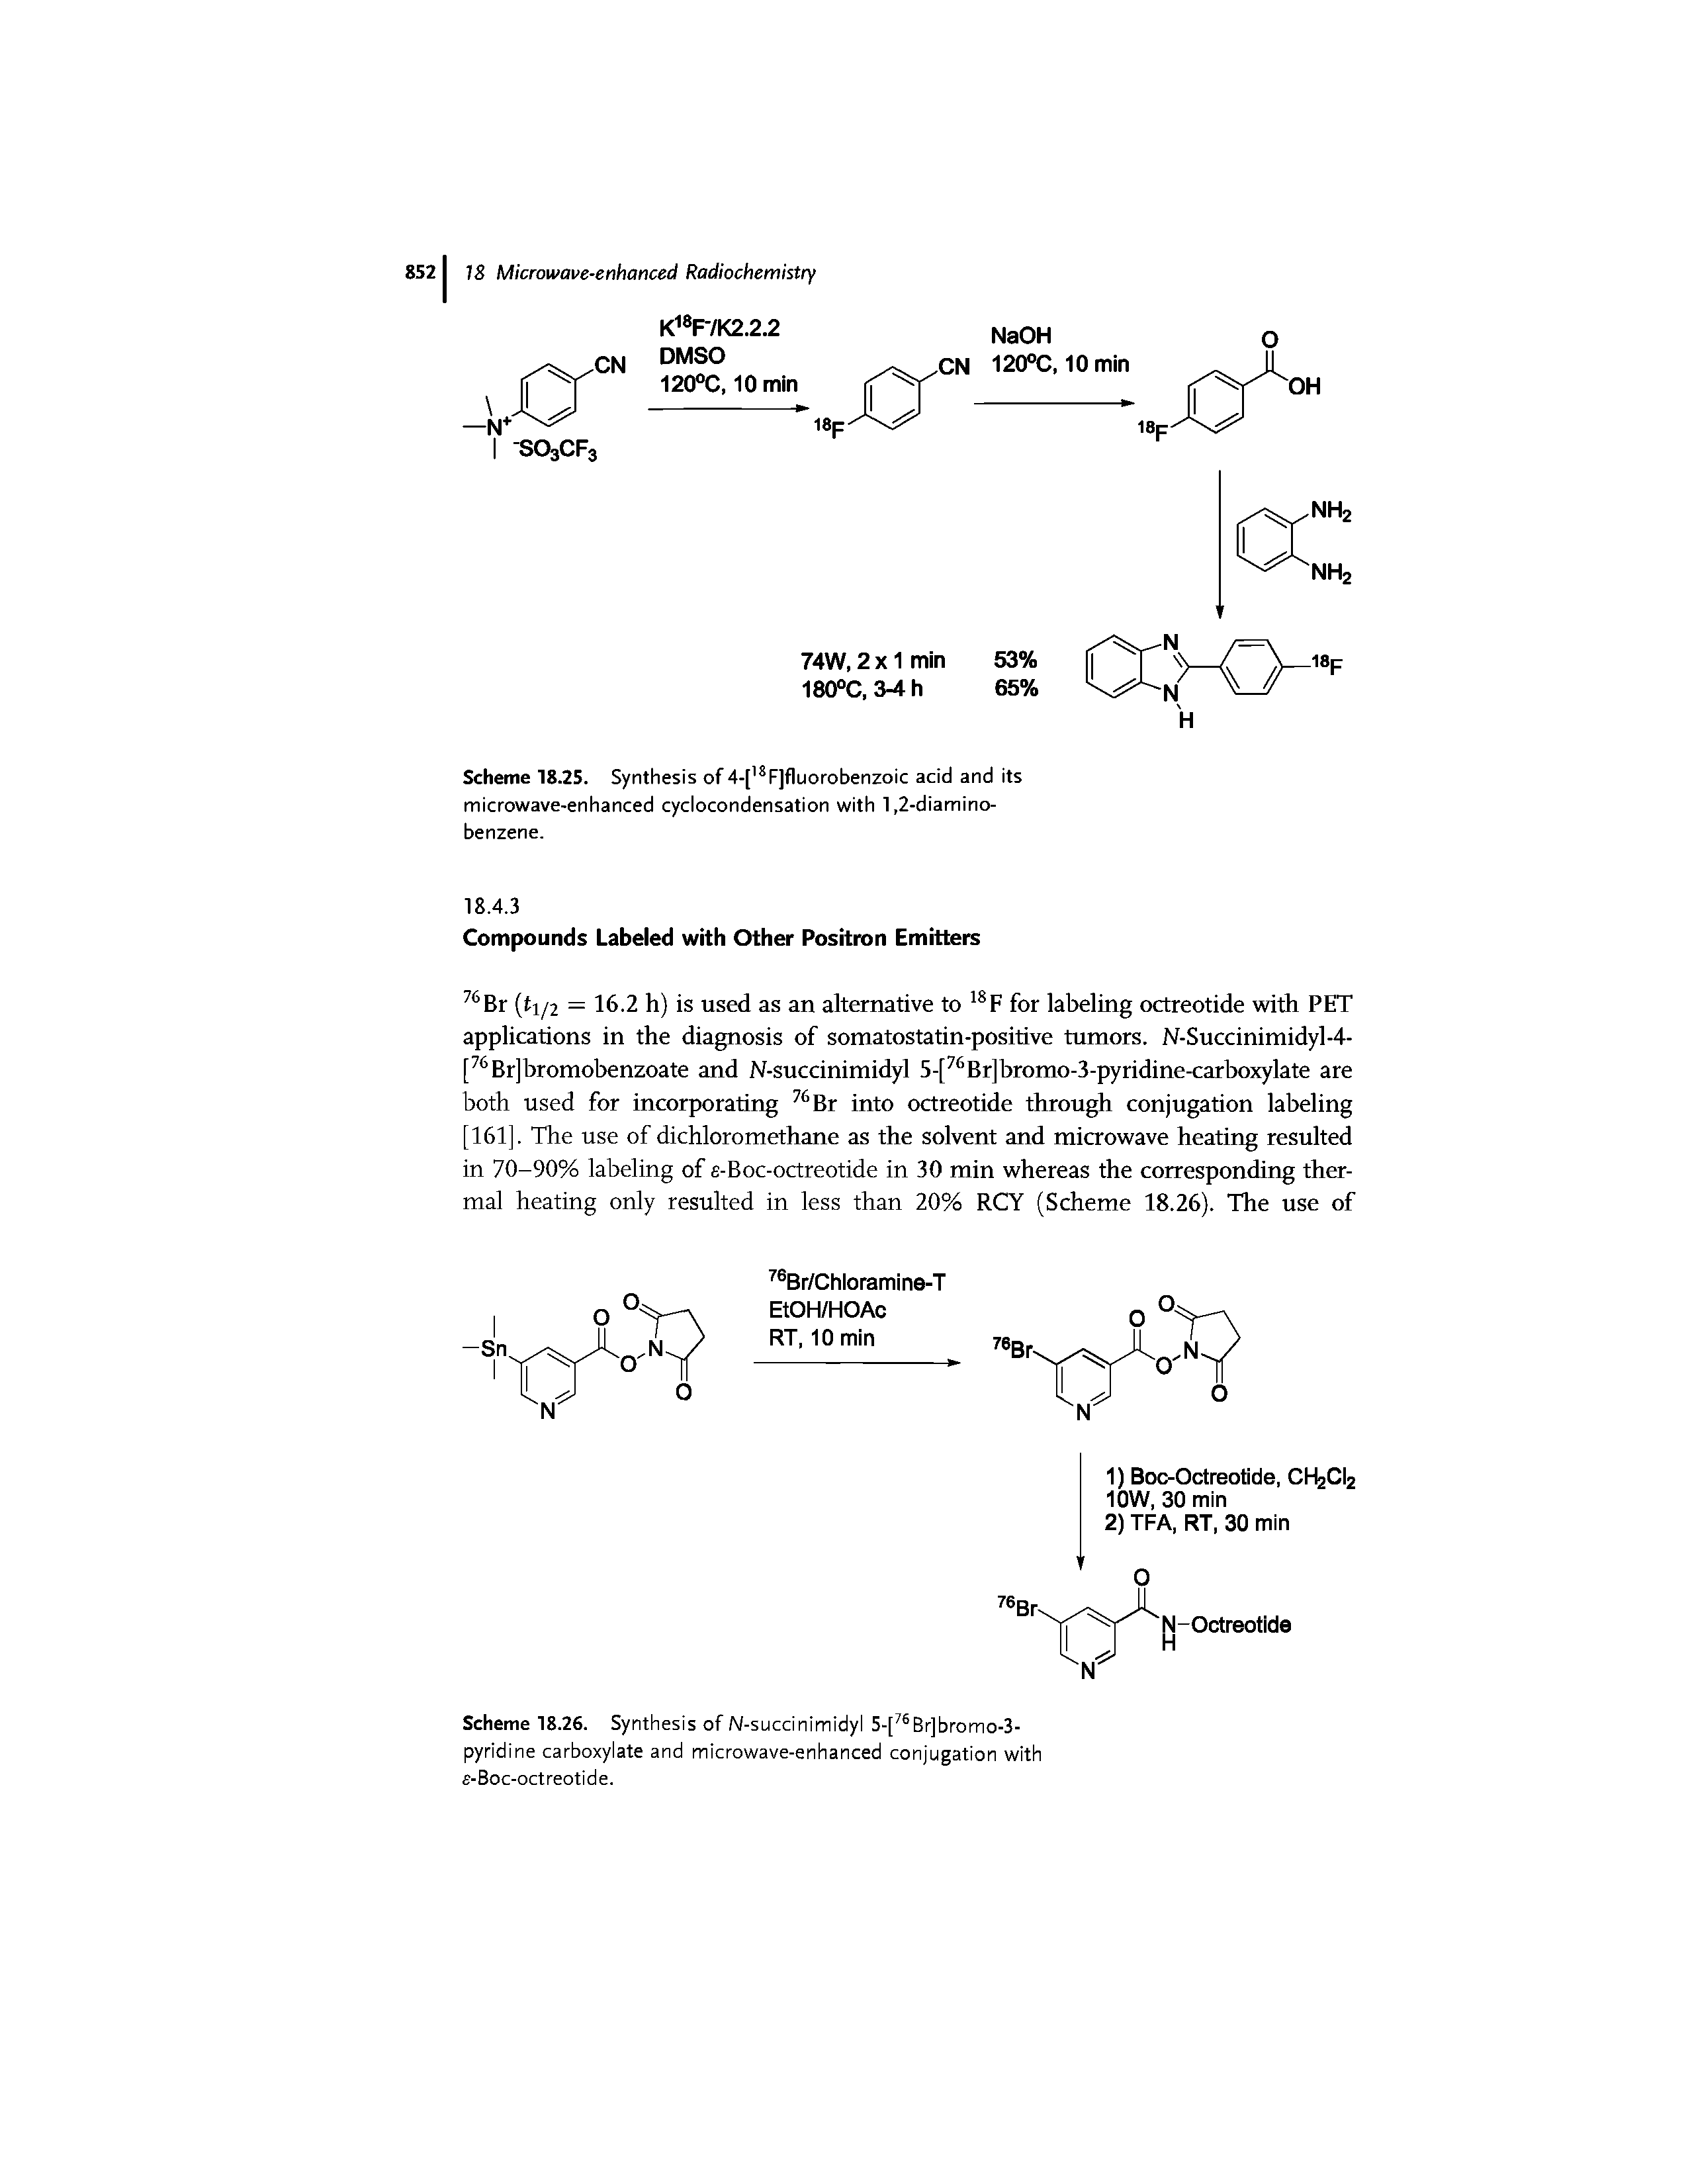 Scheme 18.25. Synthesis of 4-[ F]fluorobenzoic acid and its microwave-enhanced cyclocondensation with 1,2-diamino-benzene.